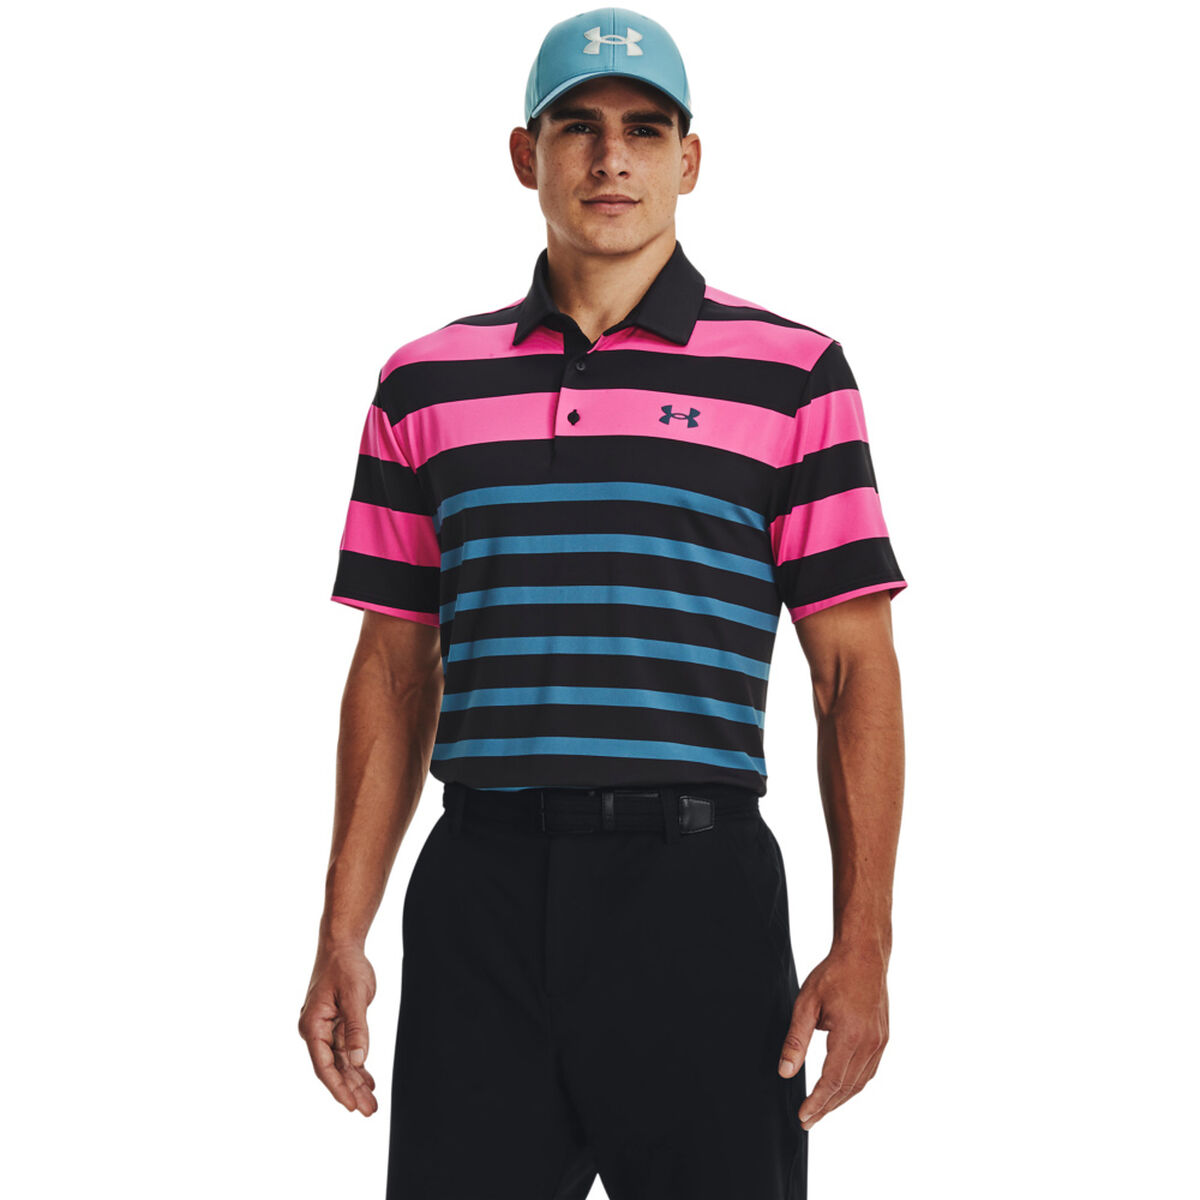 Under Armour Men’s Playoff 3.0 Rugby YD Stripe Golf Polo Shirt, Mens, Black/pink/blue, Small | American Golf